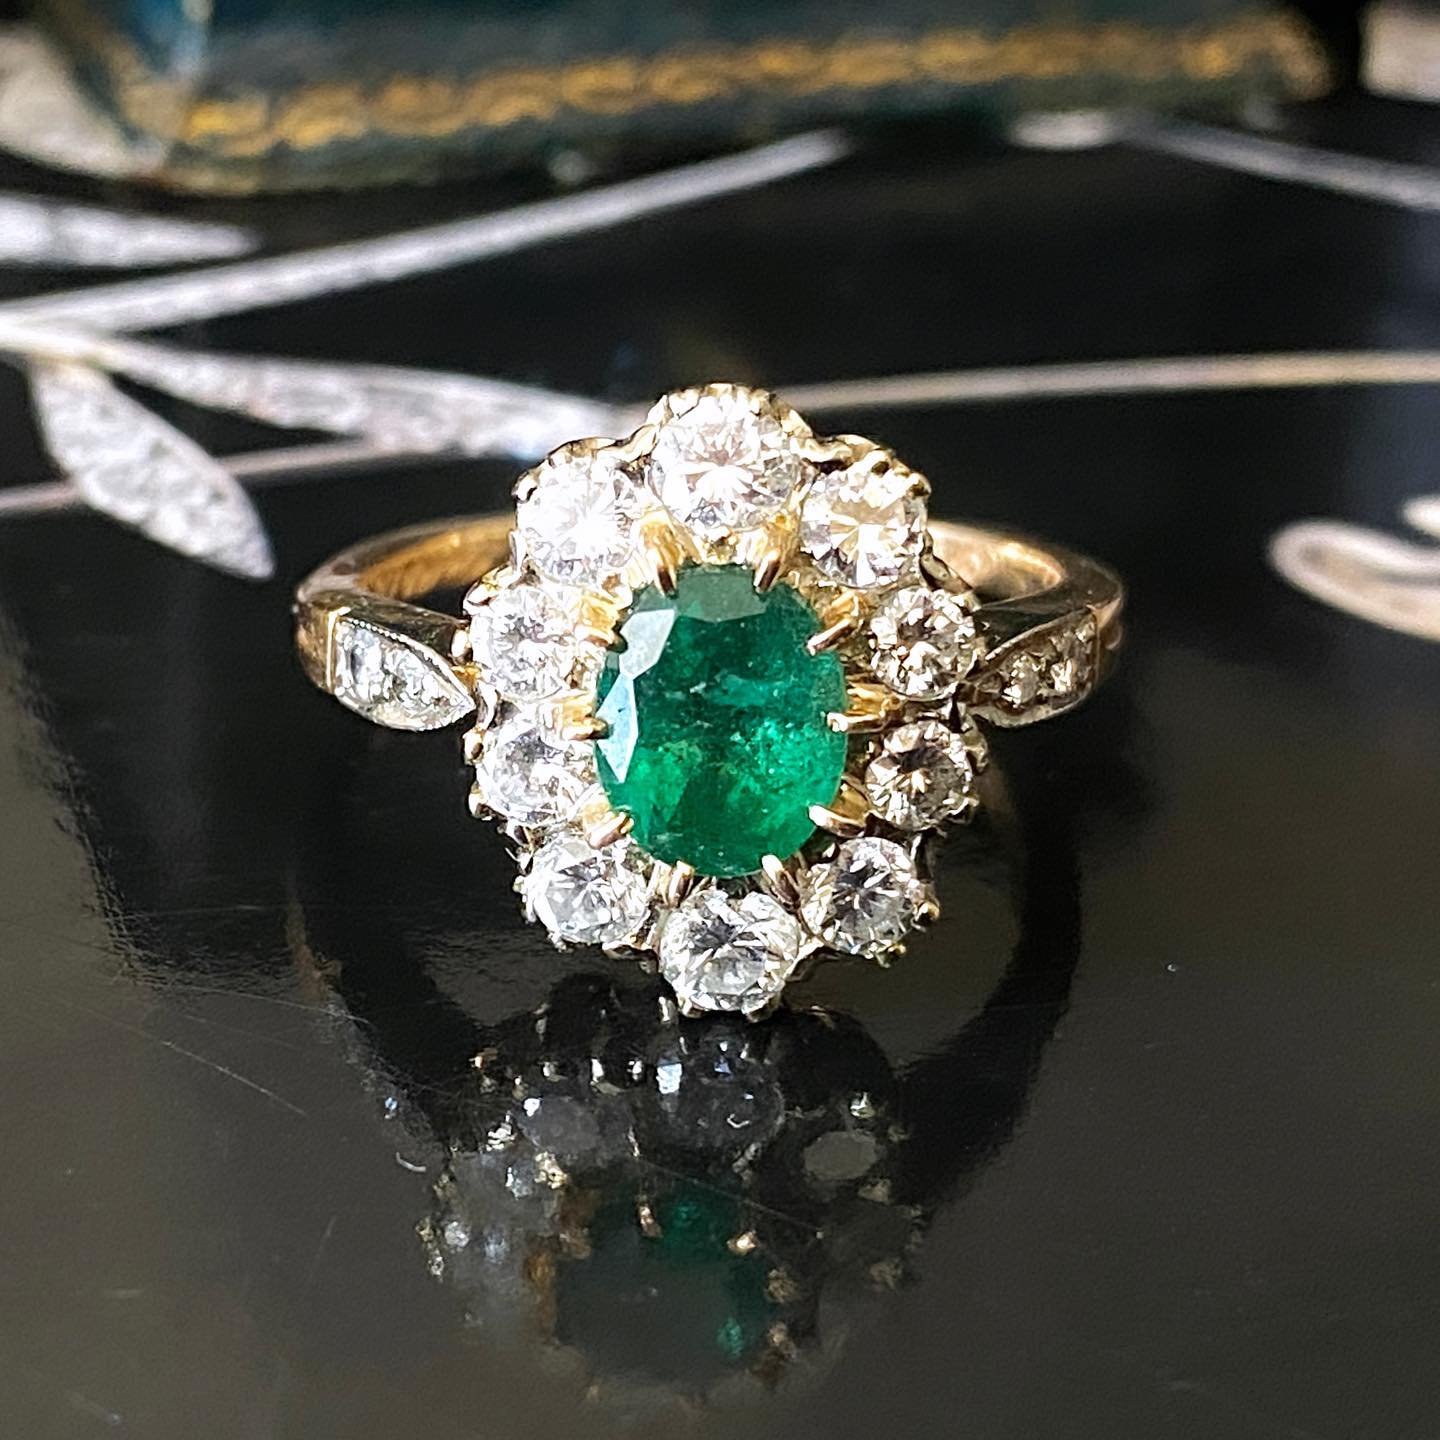 Antique ring in 18kt gold and platinum set with a natural colombian emerald of +/- 0,90 ct and old european cut diamonds for +/- 1 ct 😍

The ring is engraved &quot;Ensemble &agrave; Paris&quot; 🌹

Quality french work of the beginning of the 20th✨

